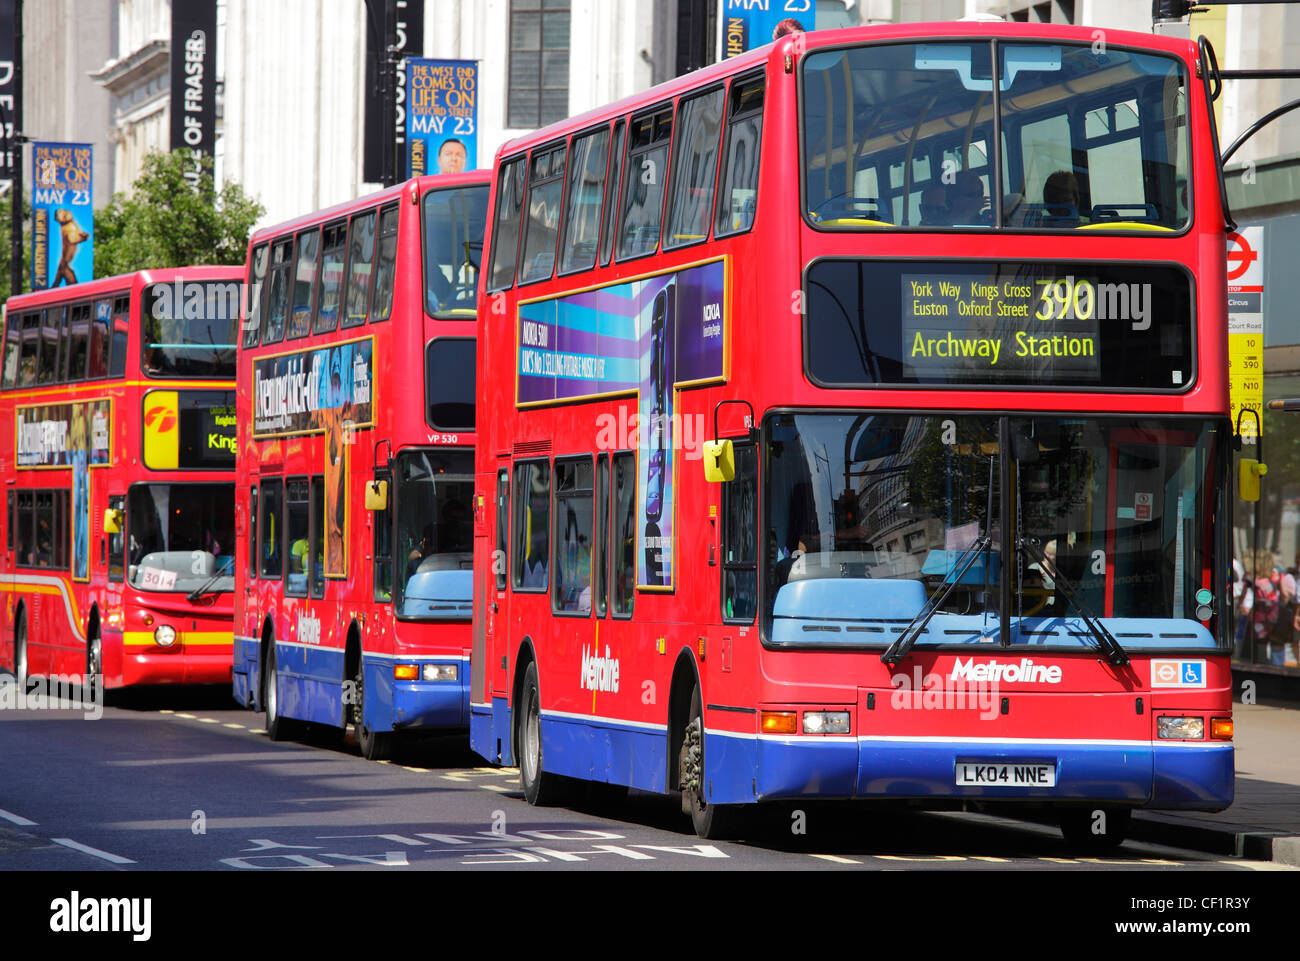 London double decker busses in Oxford Street. Stock Photo